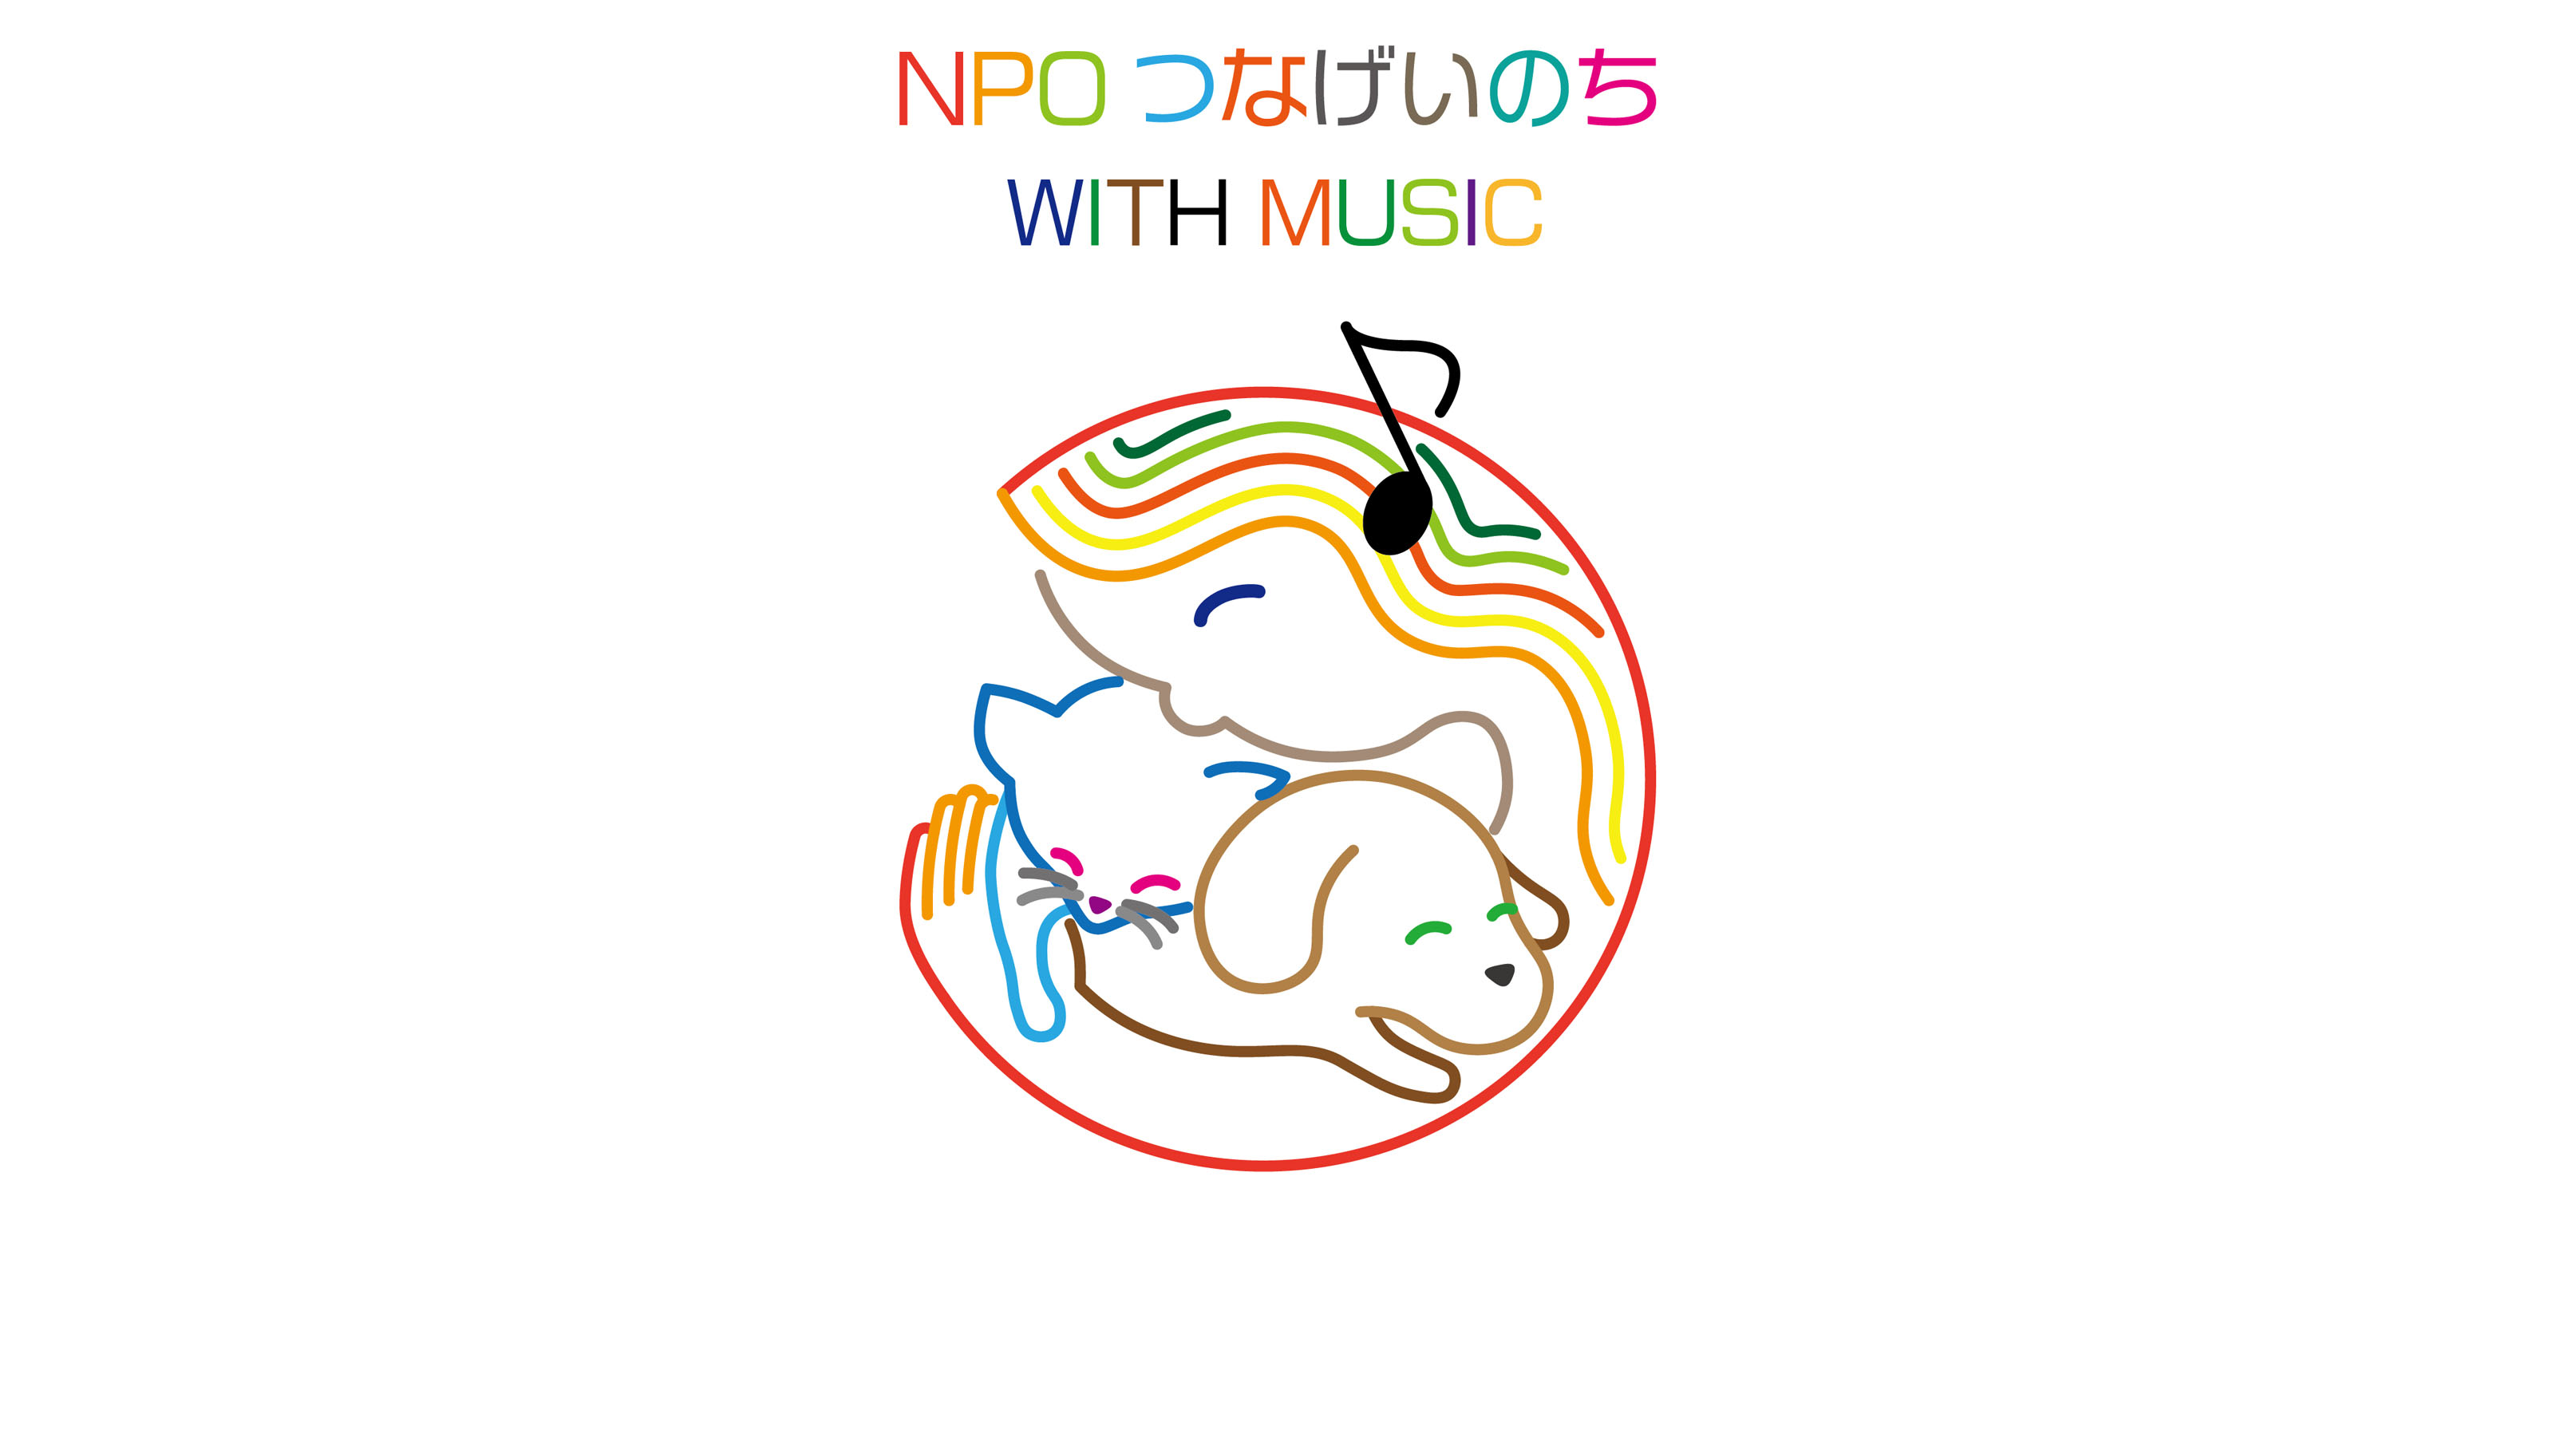 NPOつなげいのち WITH MUSIC